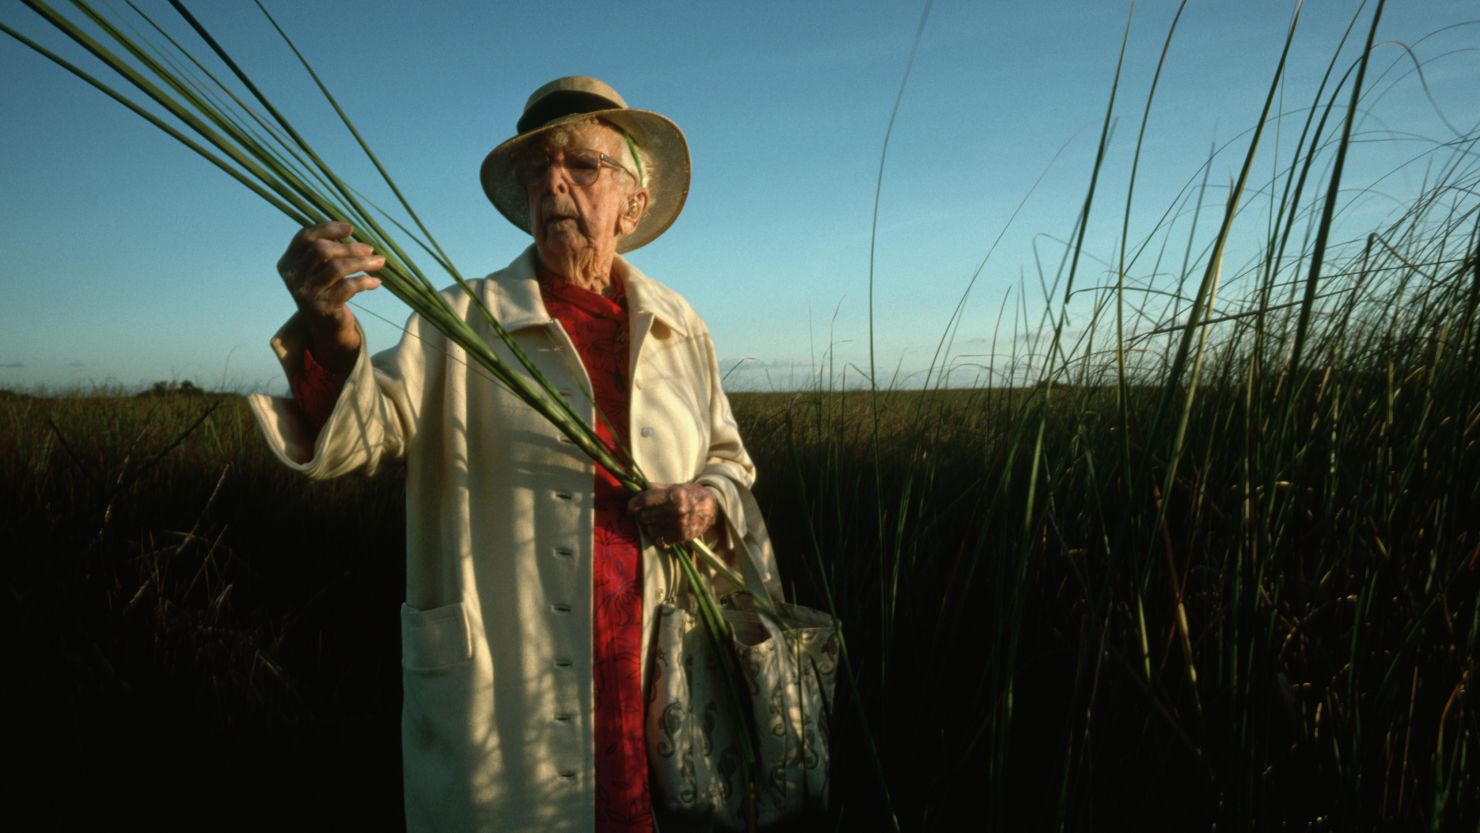 Marjory Stoneman Douglas, author of The Everglades: River of Grass, examines some stalks of saw grass from a section of the national park. Douglas is a longtime proponent of environmental protection and preservation of the Everglades. (Photo by Kevin Fleming/Corbis via Getty Images)